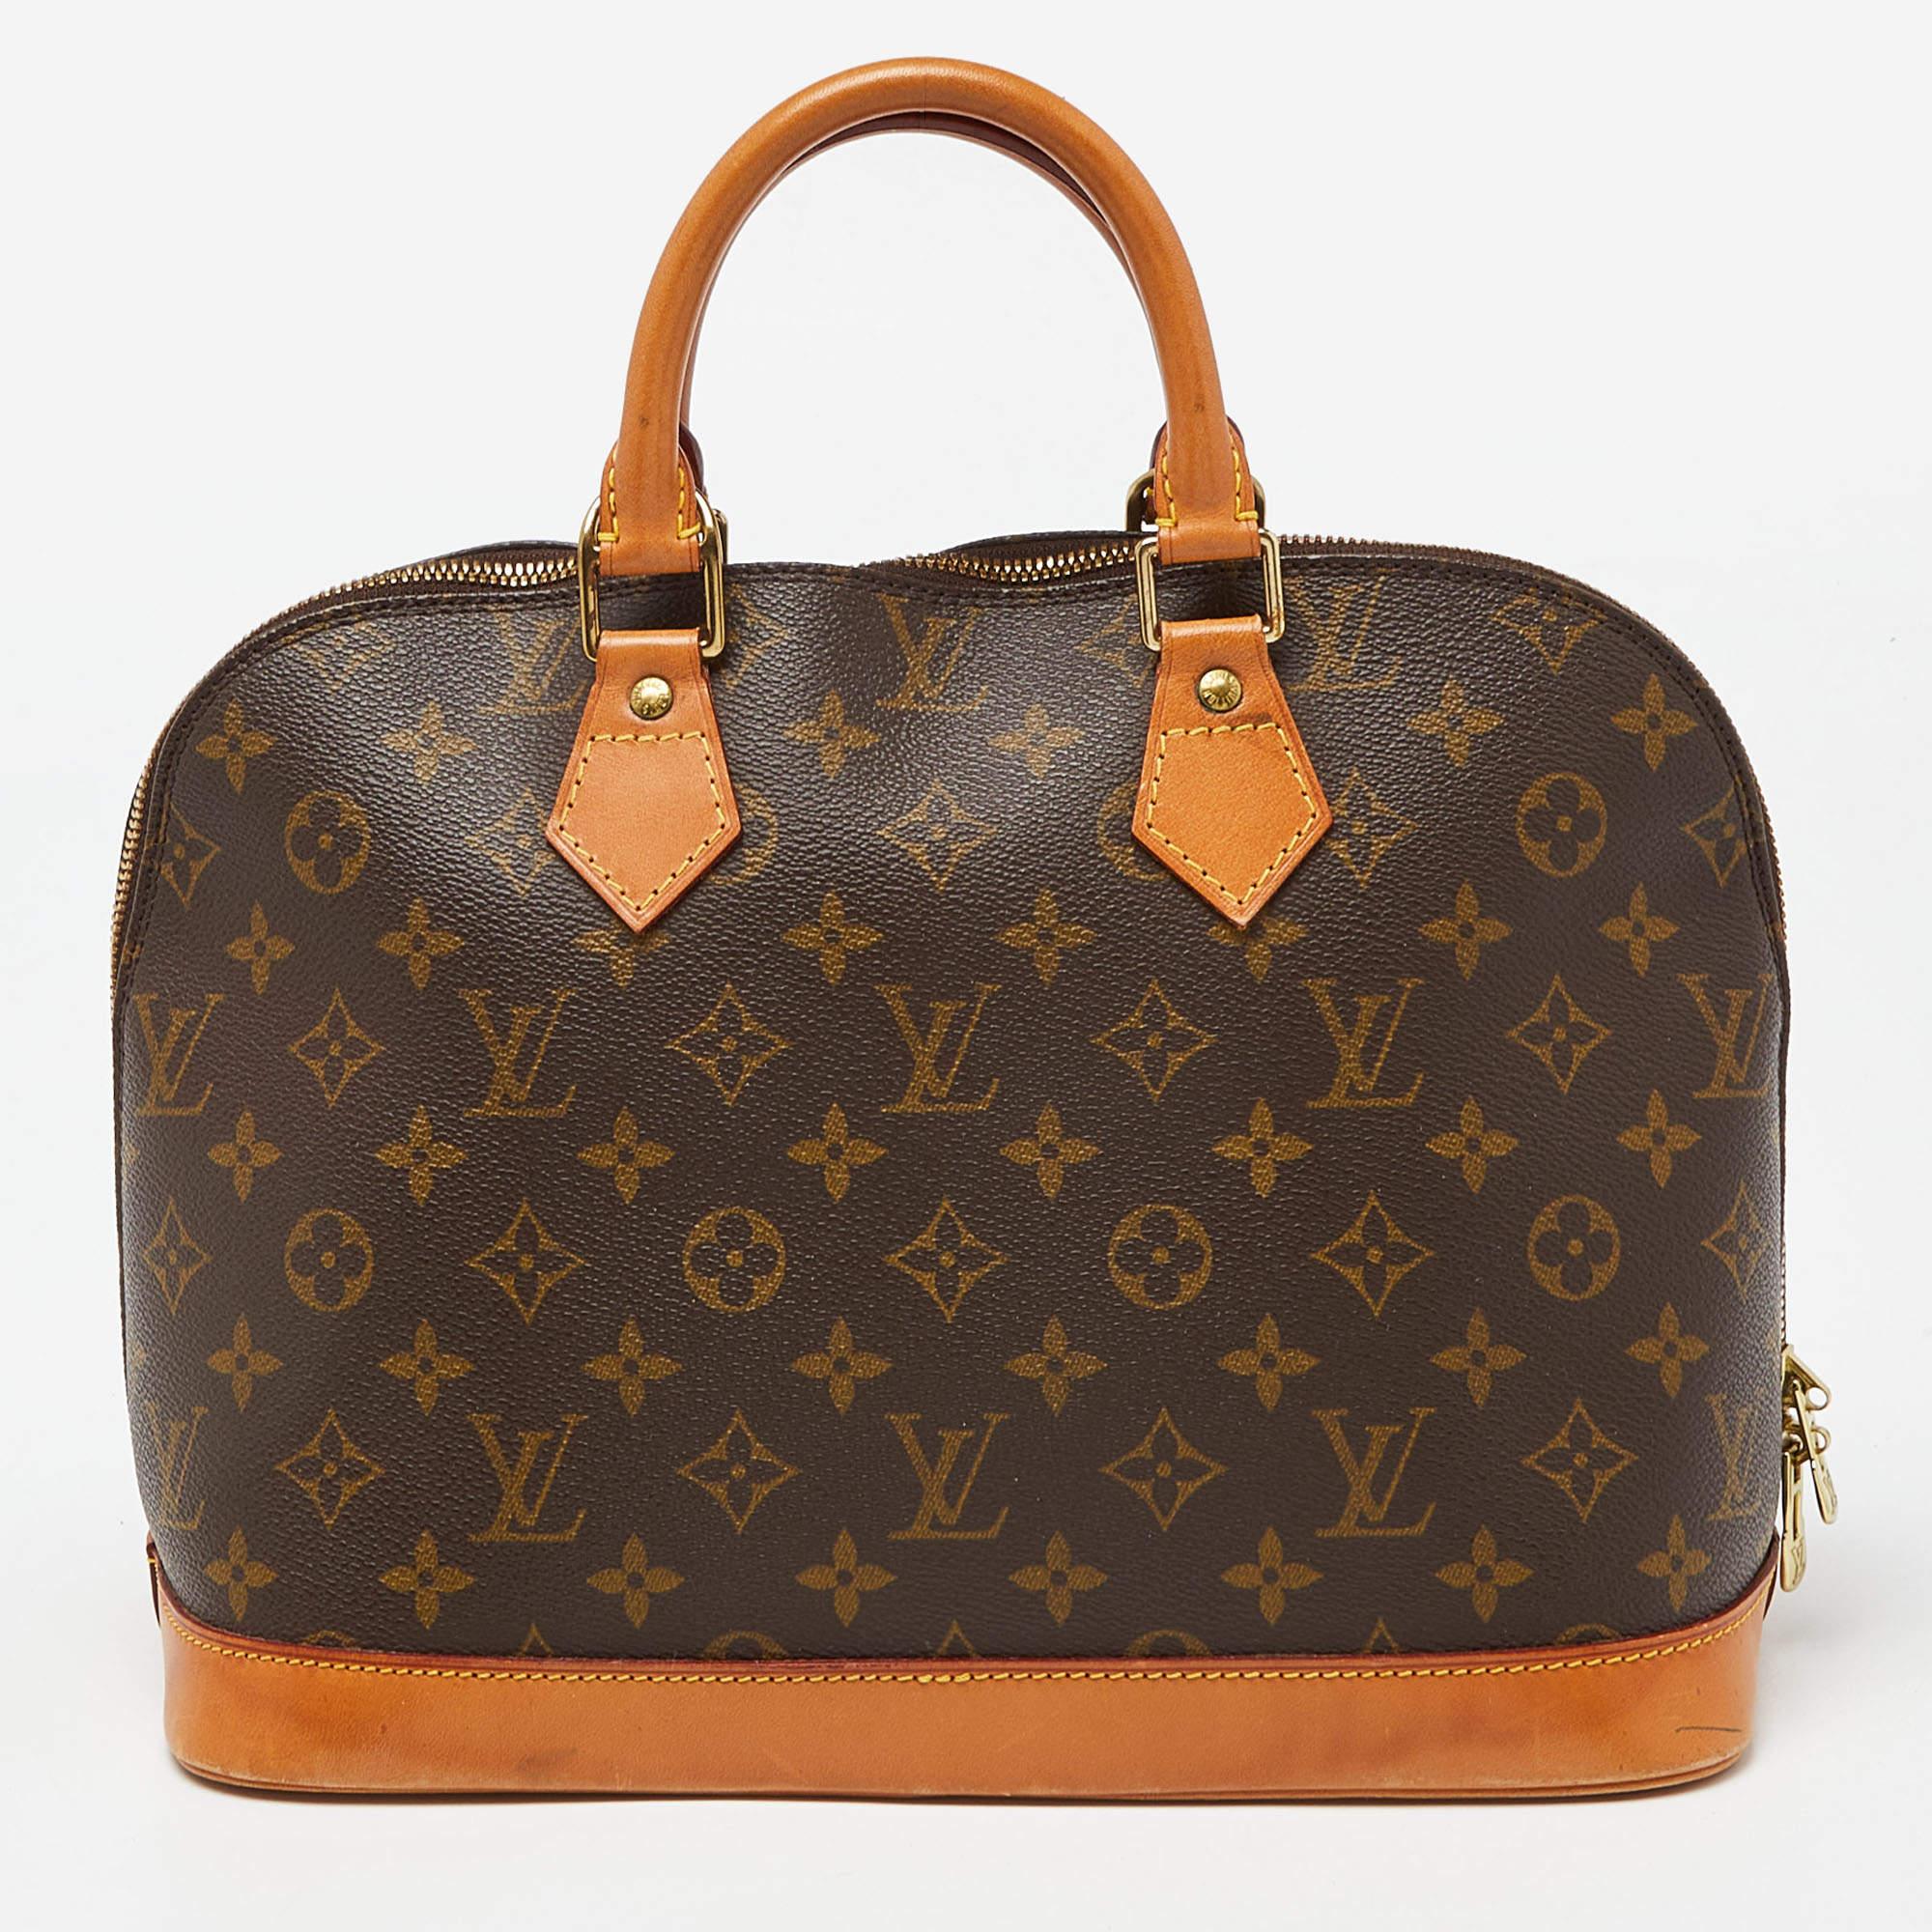 Thoughtful details, high quality, and everyday convenience mark this designer bag for women by Louis Vuitton. The bag is sewn with skill to deliver a refined look and an impeccable finish.

Includes: Original Dustbag, Original Box